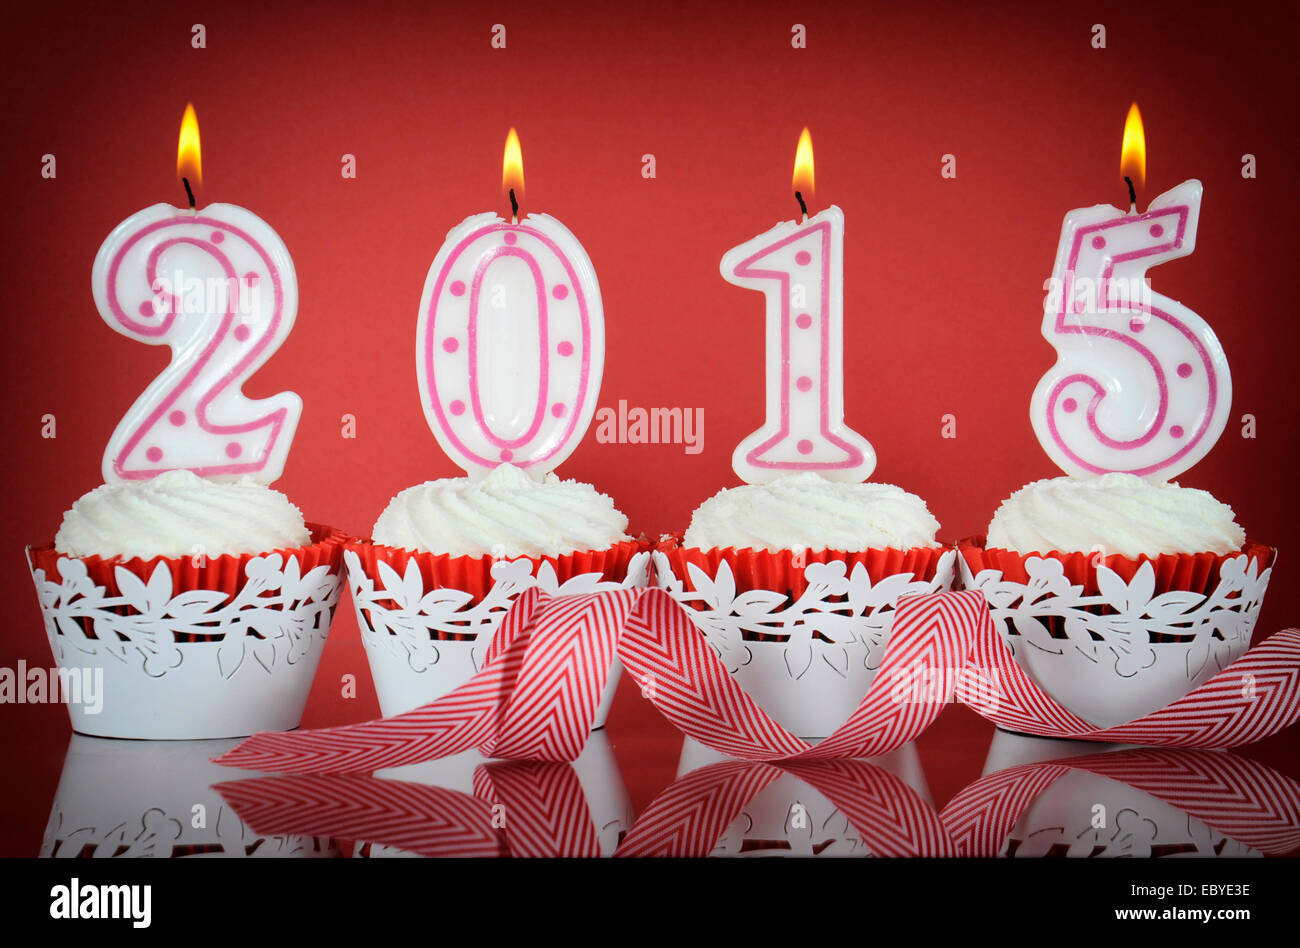 Happy New Year for 2015 red velvet cupcakes in red and white theme with lit candles on a red background. Stock Photo